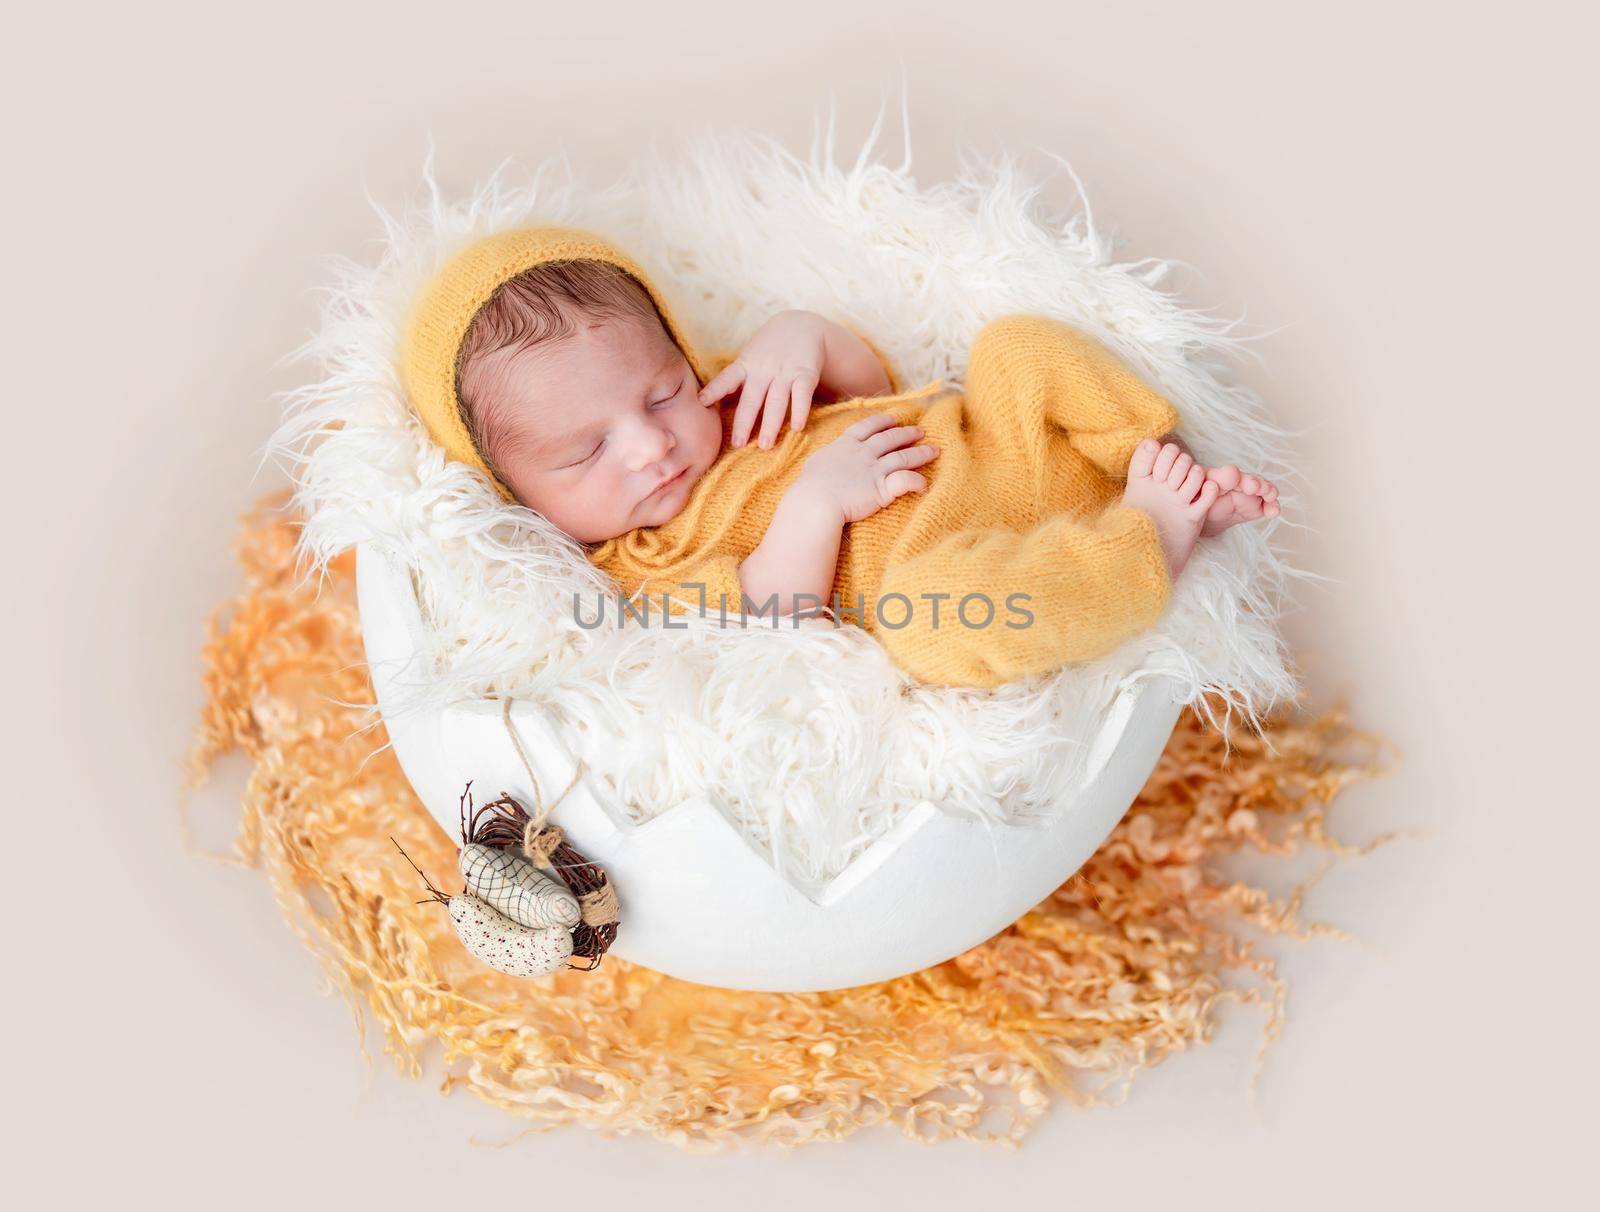 Cute newborn in yellow knitted suit lying in egg cradle